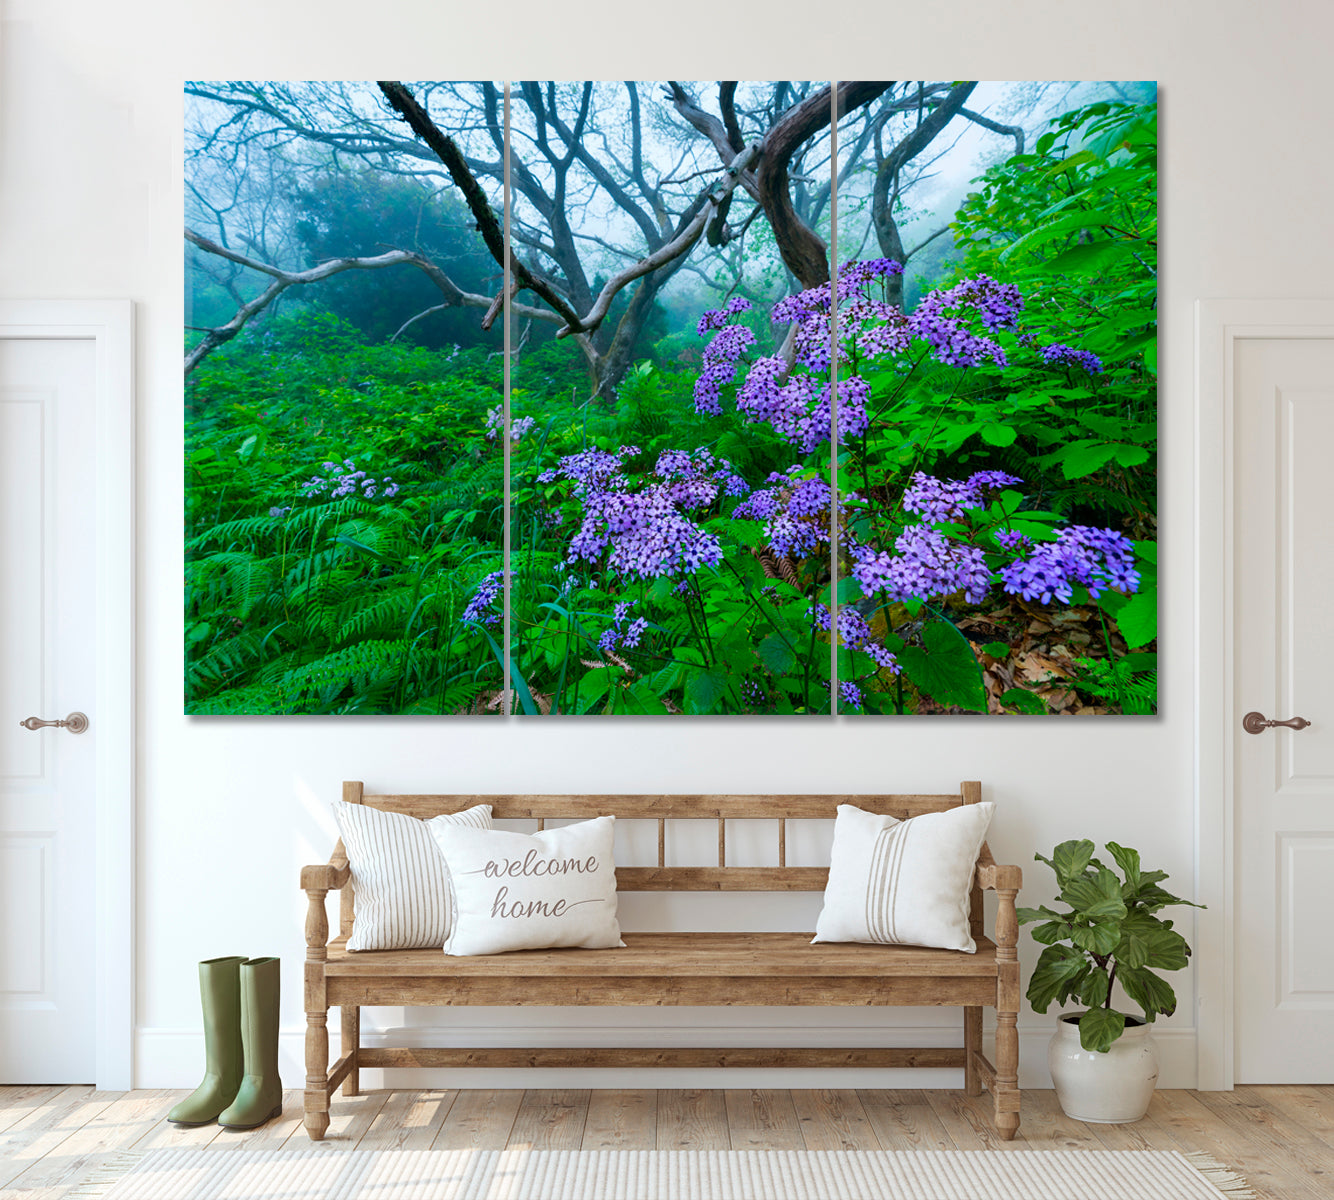 Wild Flowers on Canary Islands Spain Canvas Print ArtLexy 3 Panels 36"x24" inches 